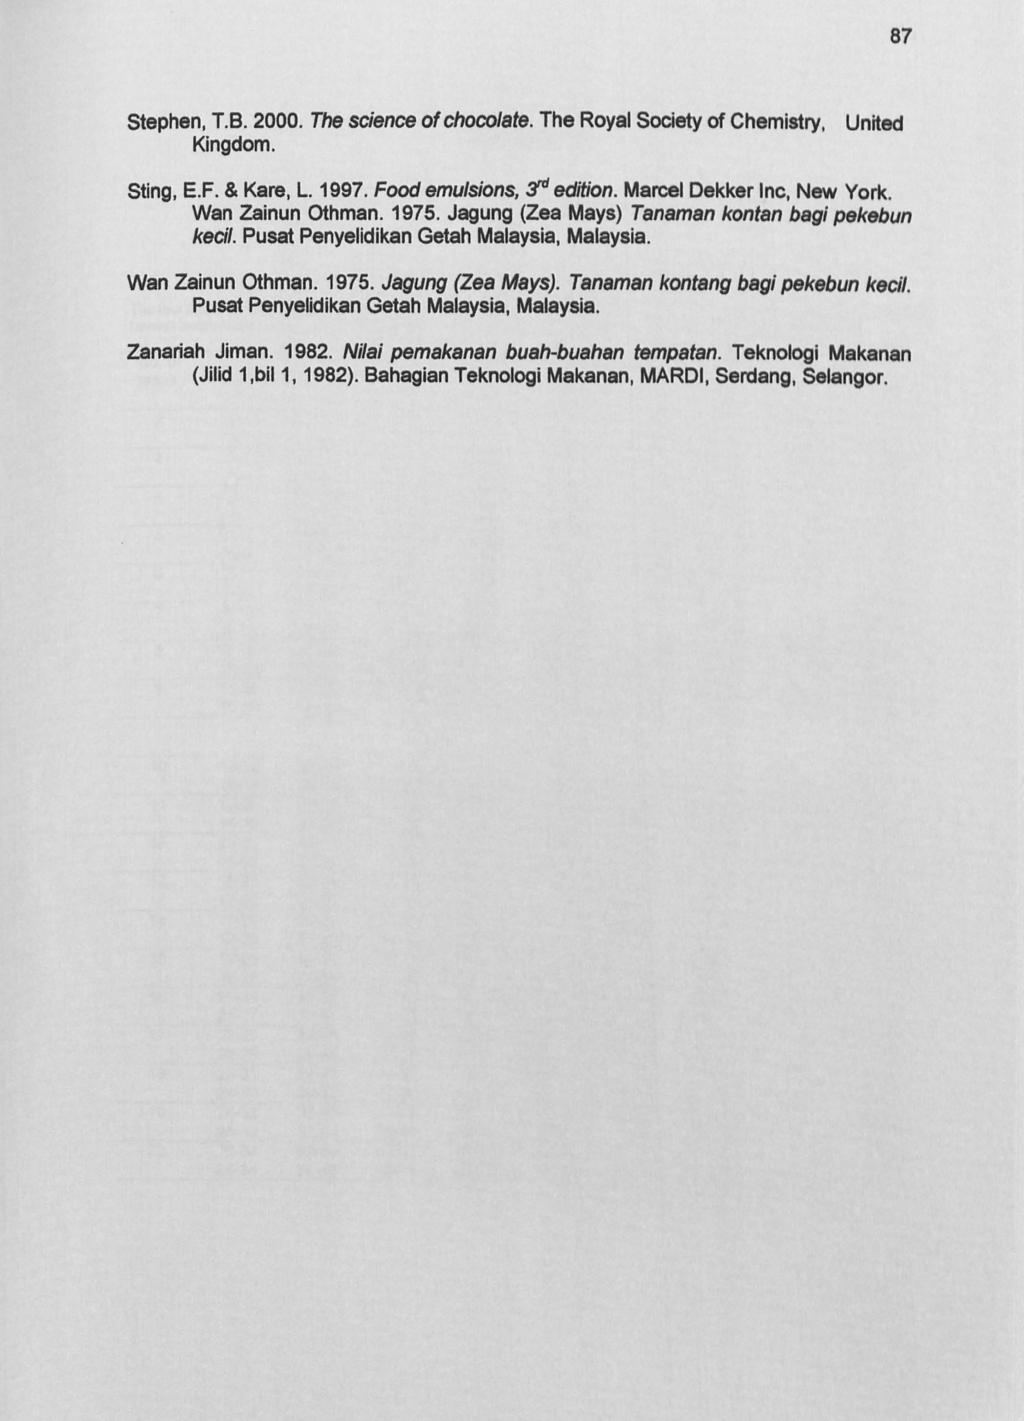 87 Stephen, T. B. 2000. The science of chocolate. The Royal Society of Chemistry, United Kingdom. Sting, E. F. & Kare, L. 1997. Food emulsions, 3"d edition. Marcel Dekker Inc, New York.